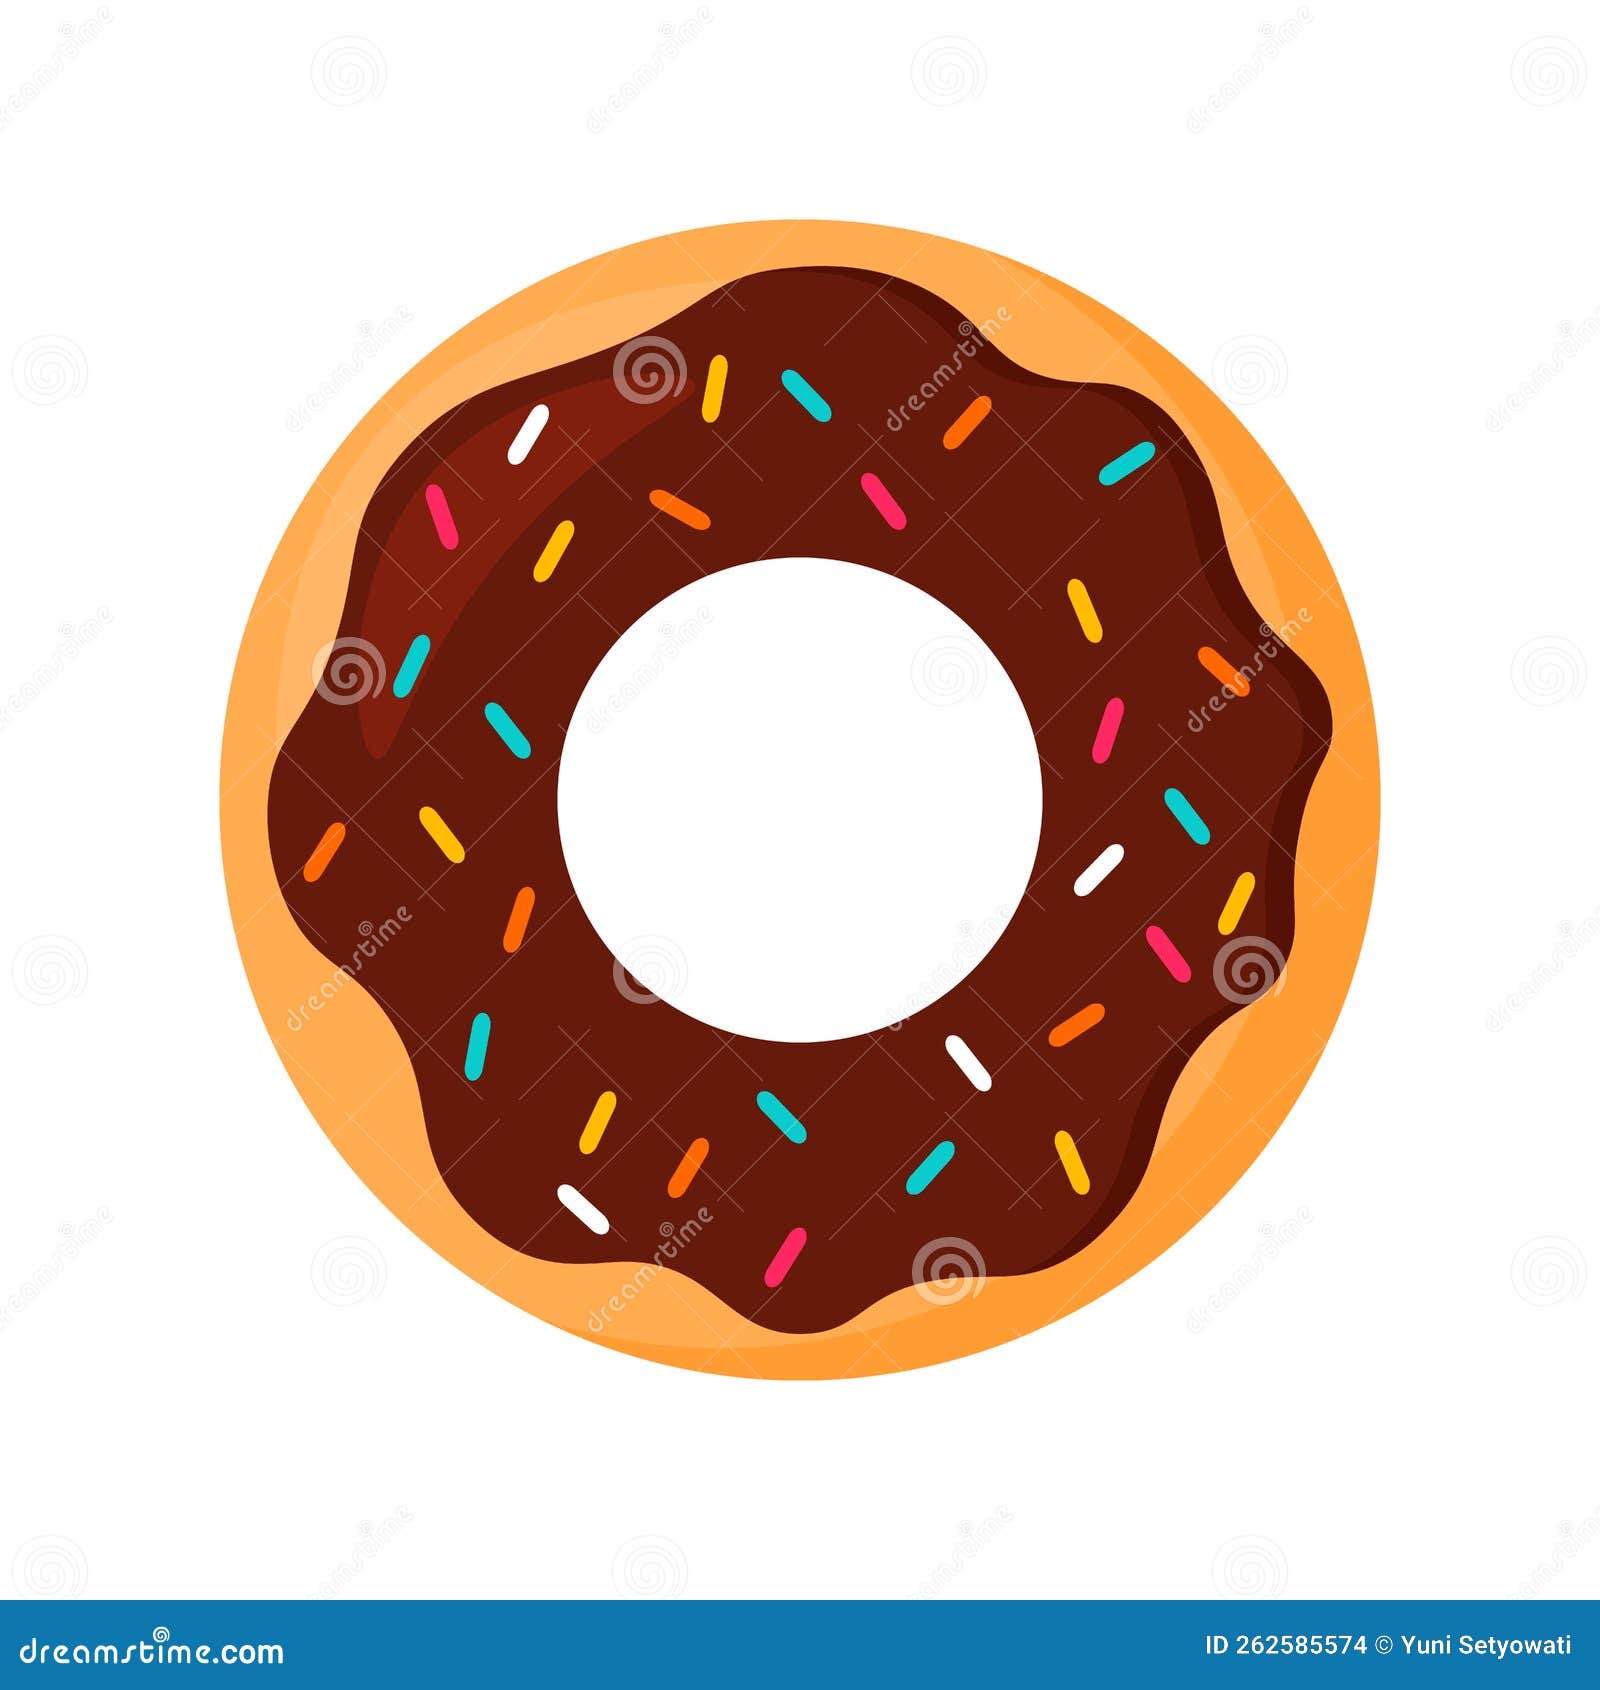 Animated Donuts Stock Illustrations – 19 Animated Donuts Stock  Illustrations, Vectors & Clipart - Dreamstime